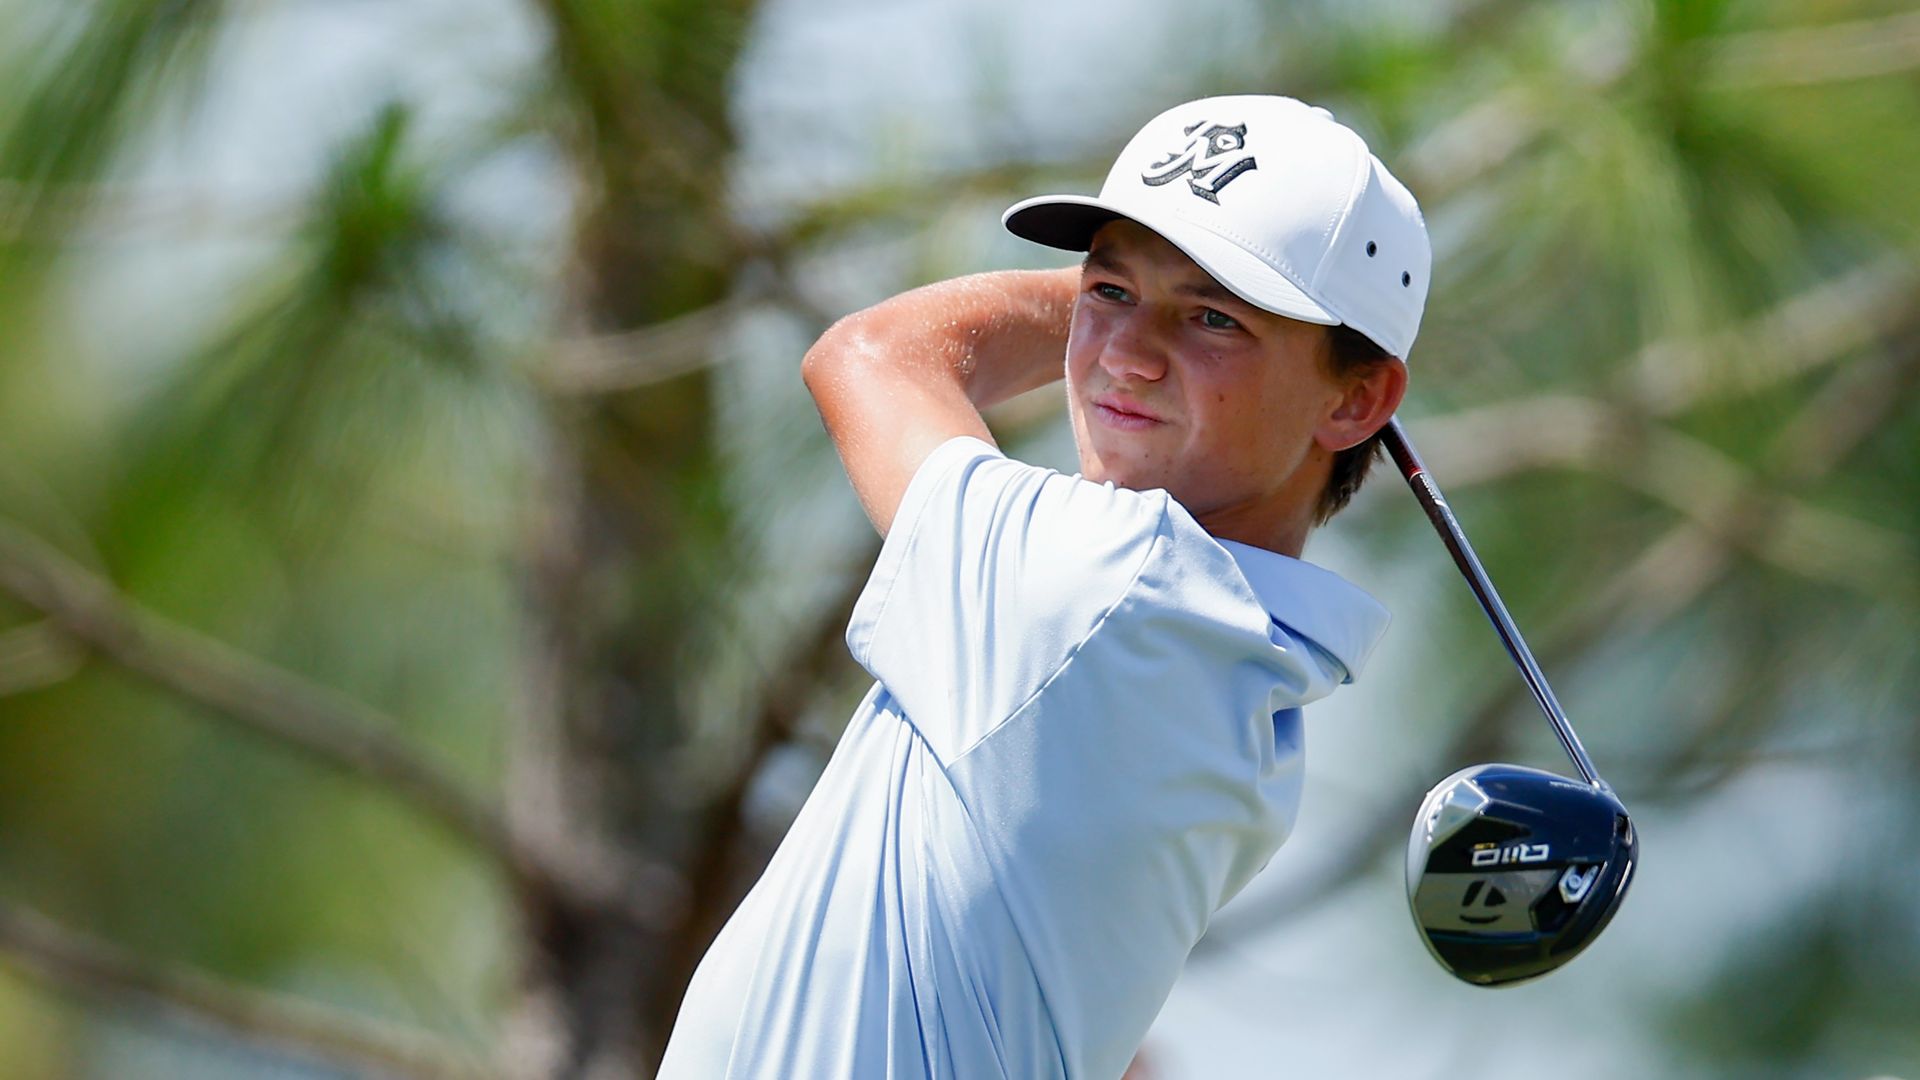 'i'm speechless' - 15-year-old miles russell becomes youngest to make cut in korn ferry tour history